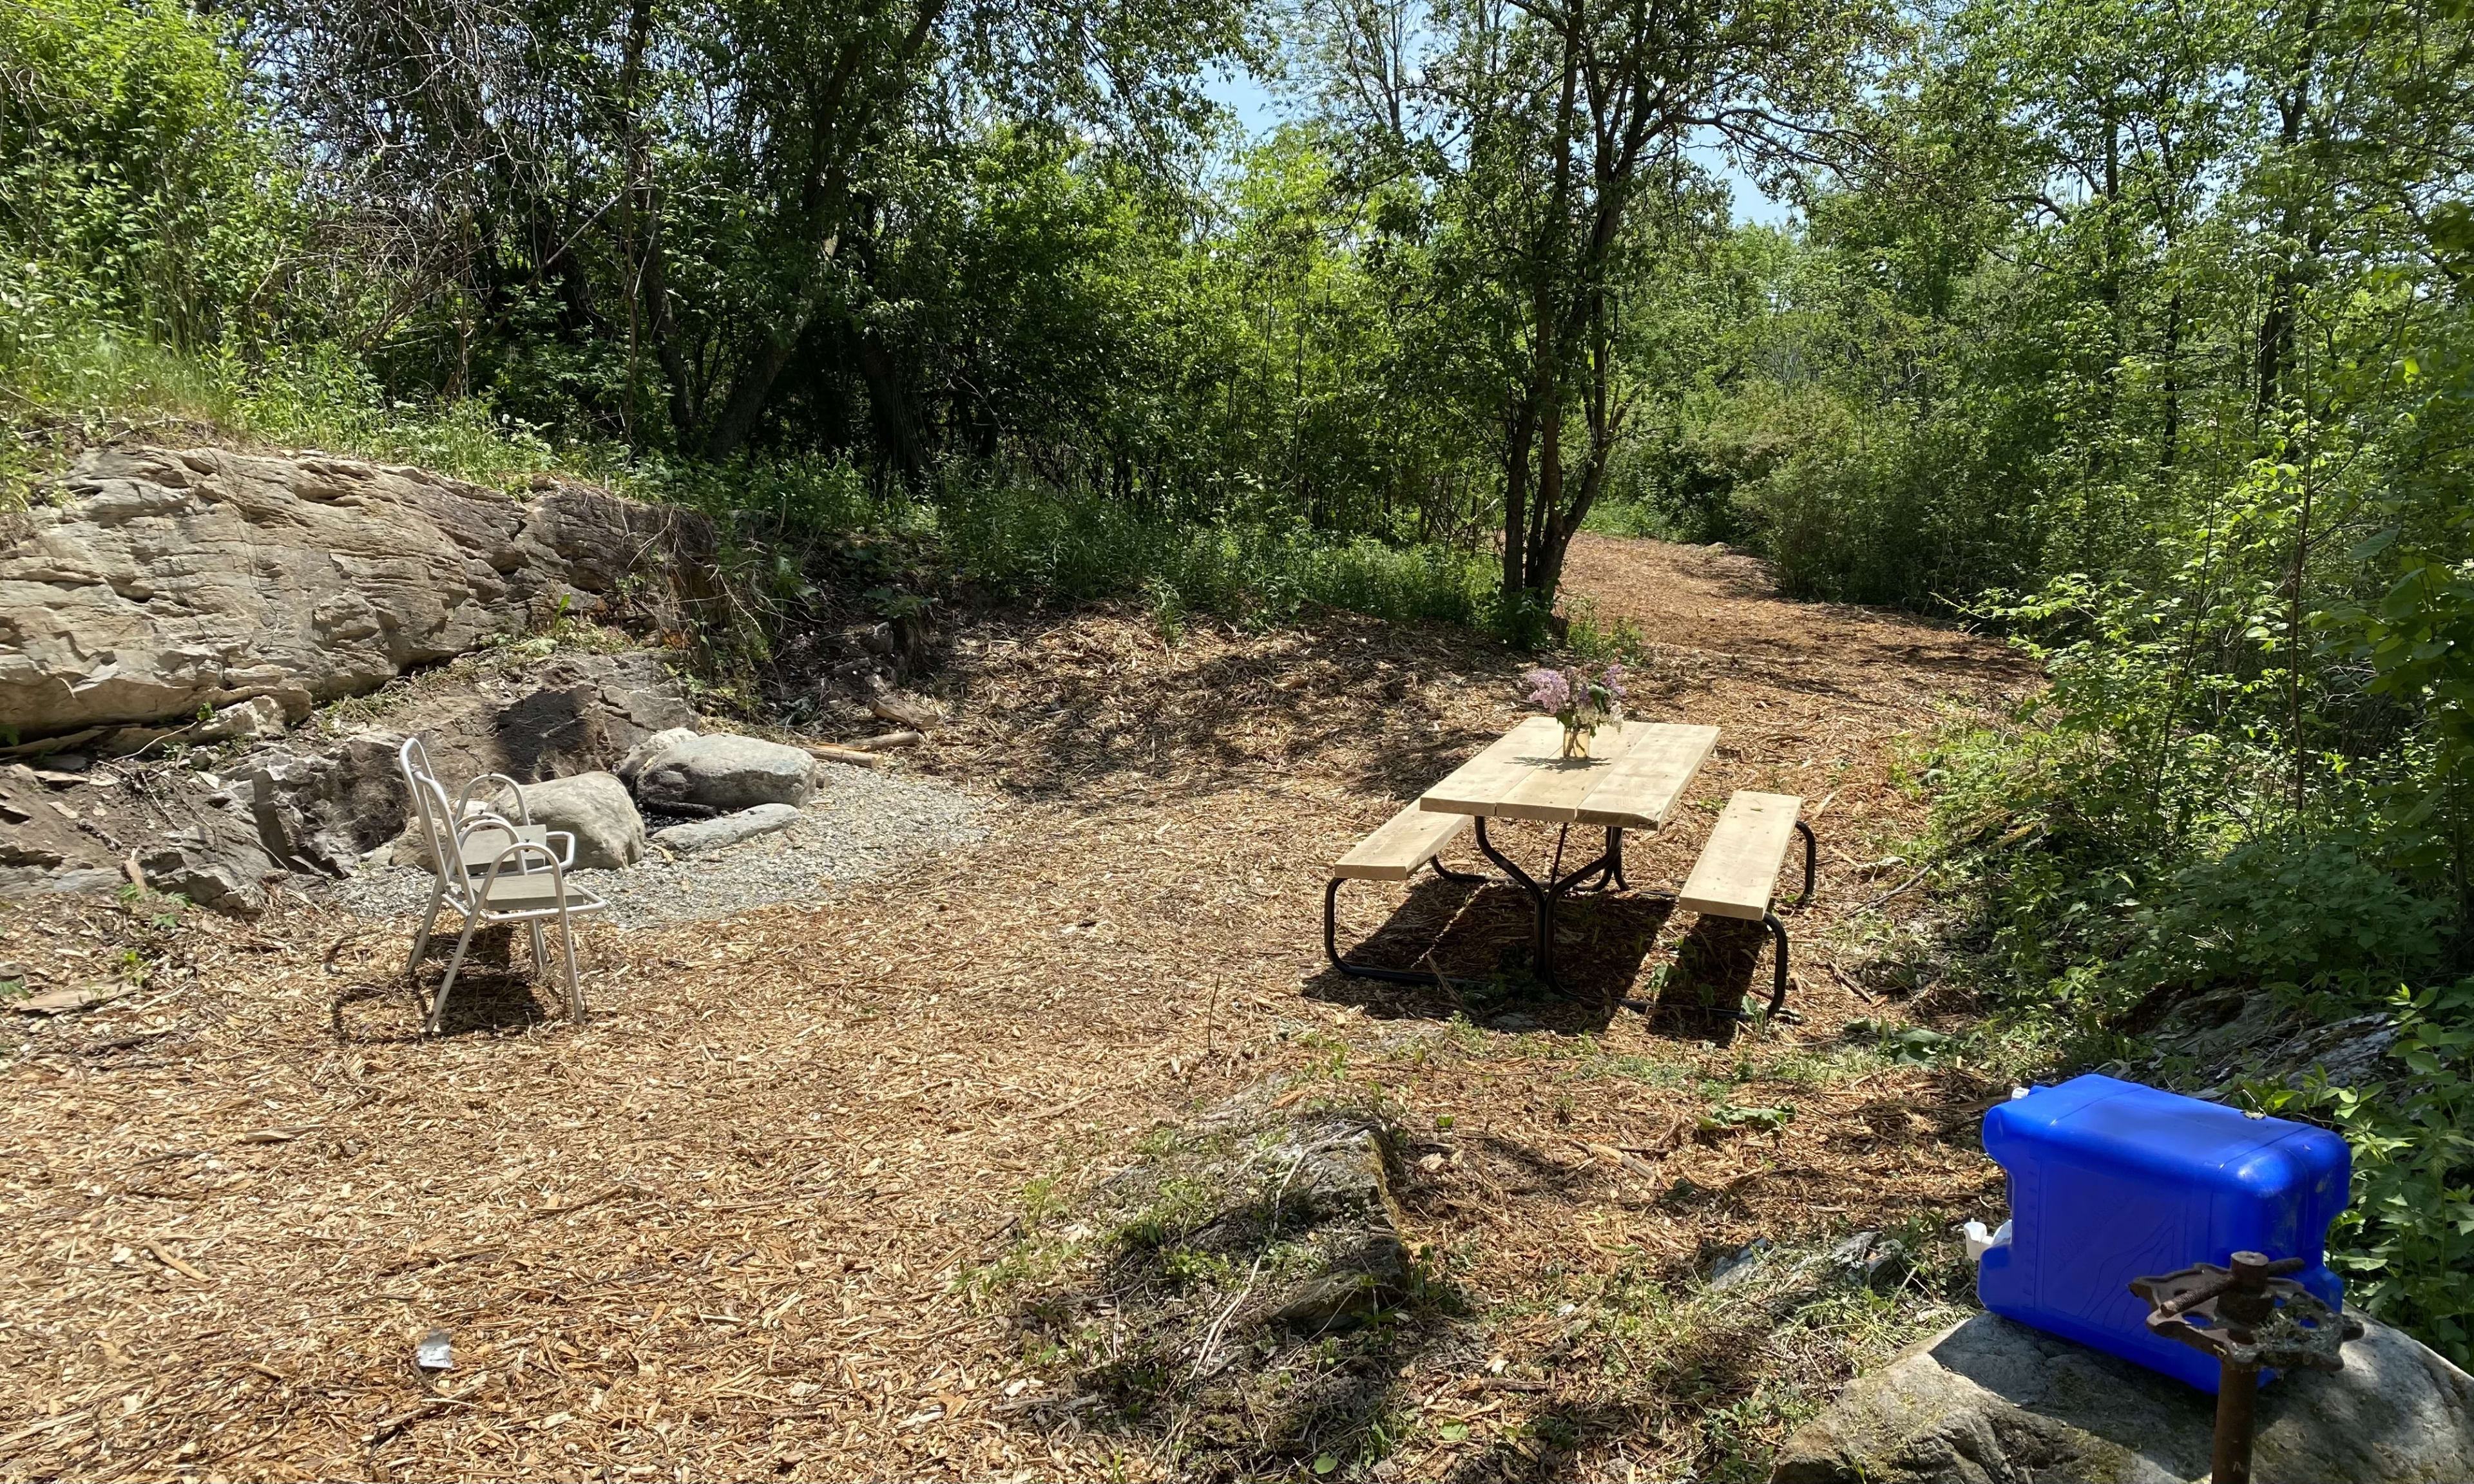 Each campsite has a wood picnic table, firepit and lots of room for games like cornhole.